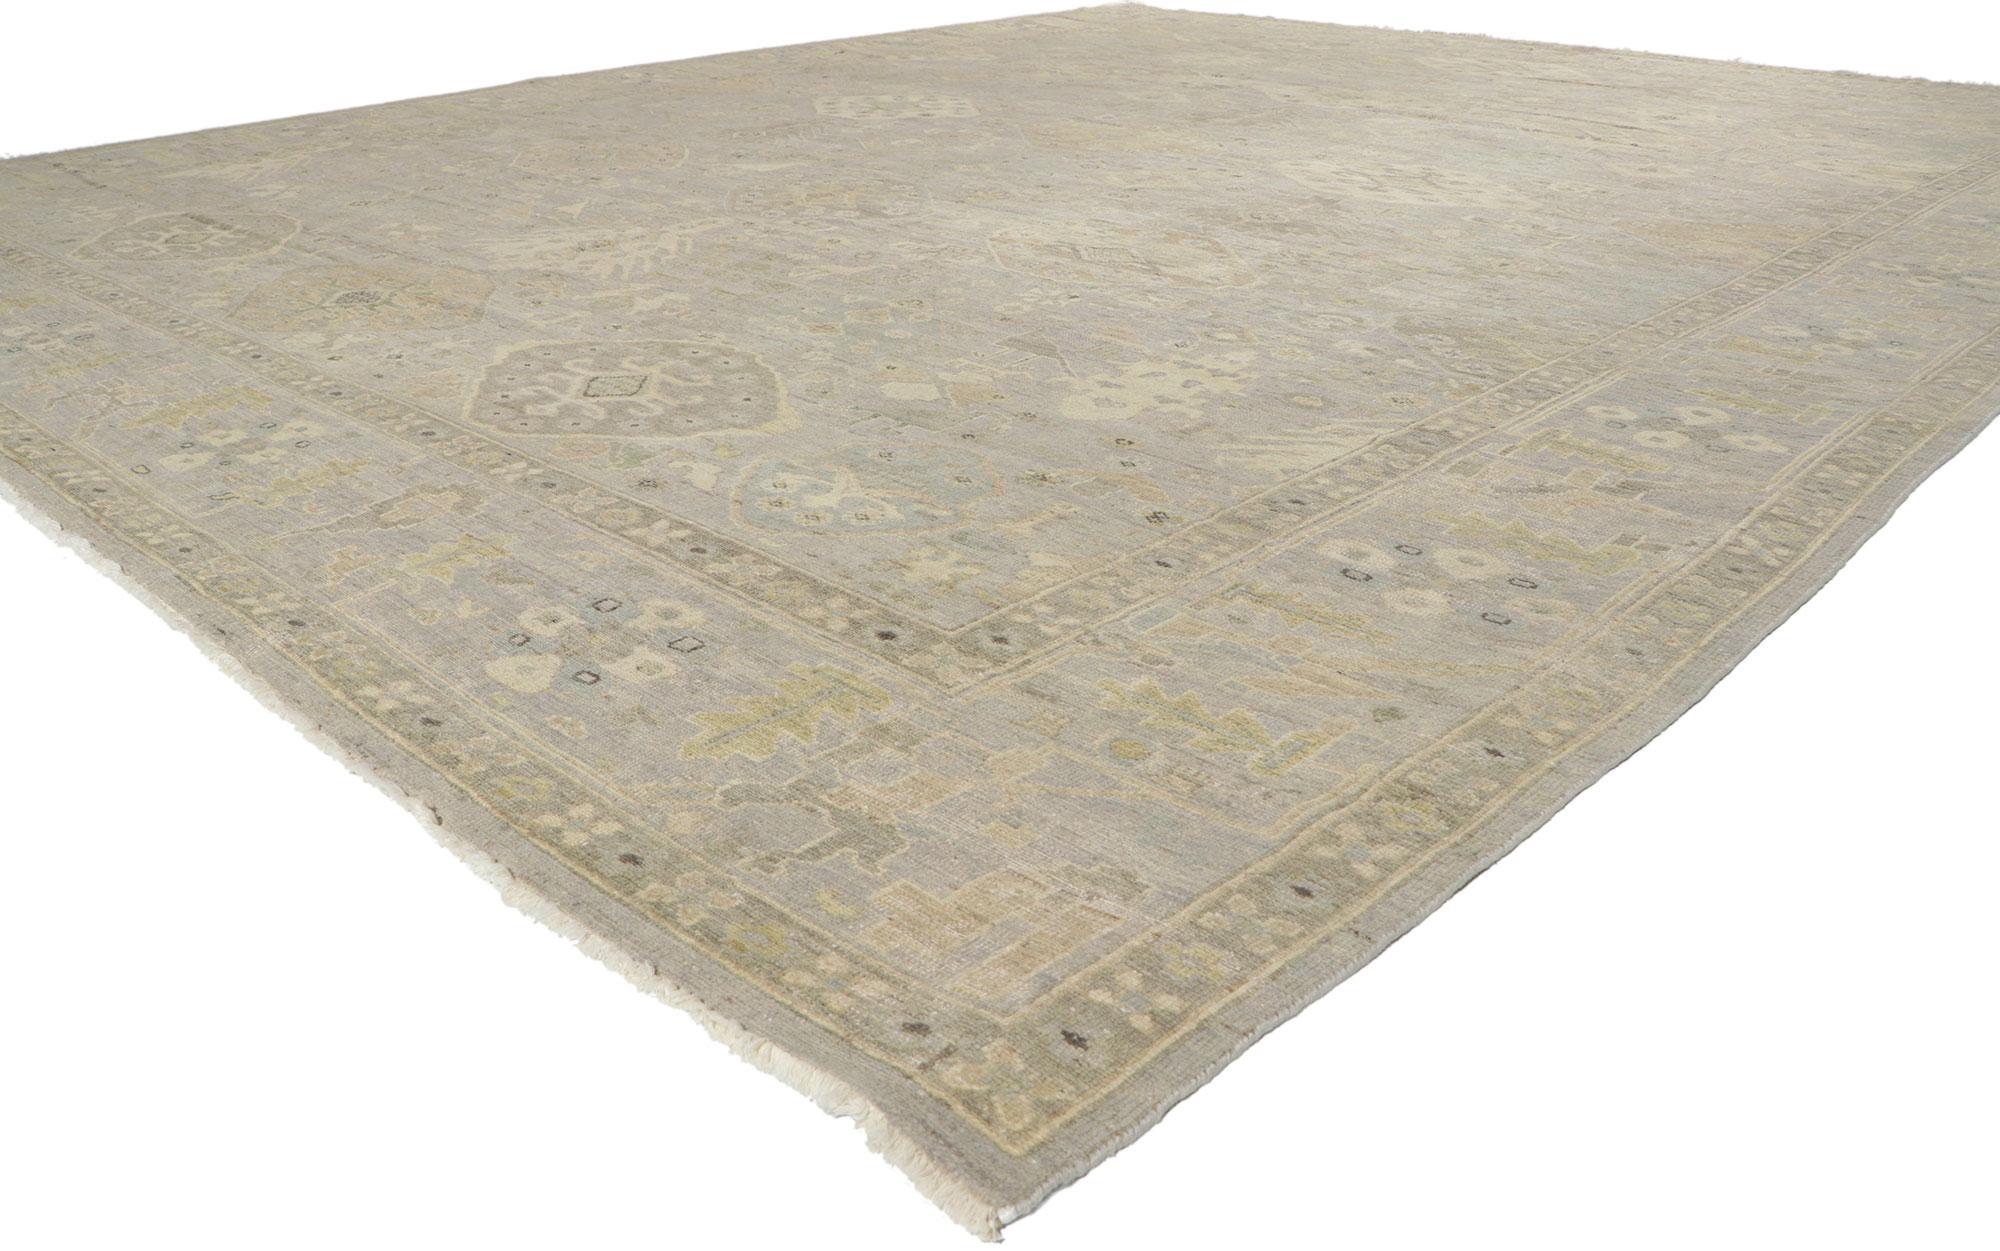 30832 New Distressed Oushak Rug with Vintage Style 12'00 x 14'07. Emanating traditional sensibility and rugged beauty with nomadic charm, this hand-knotted wool distressed Indian Oushak rug creates an inimitable warmth and calming ambiance. The